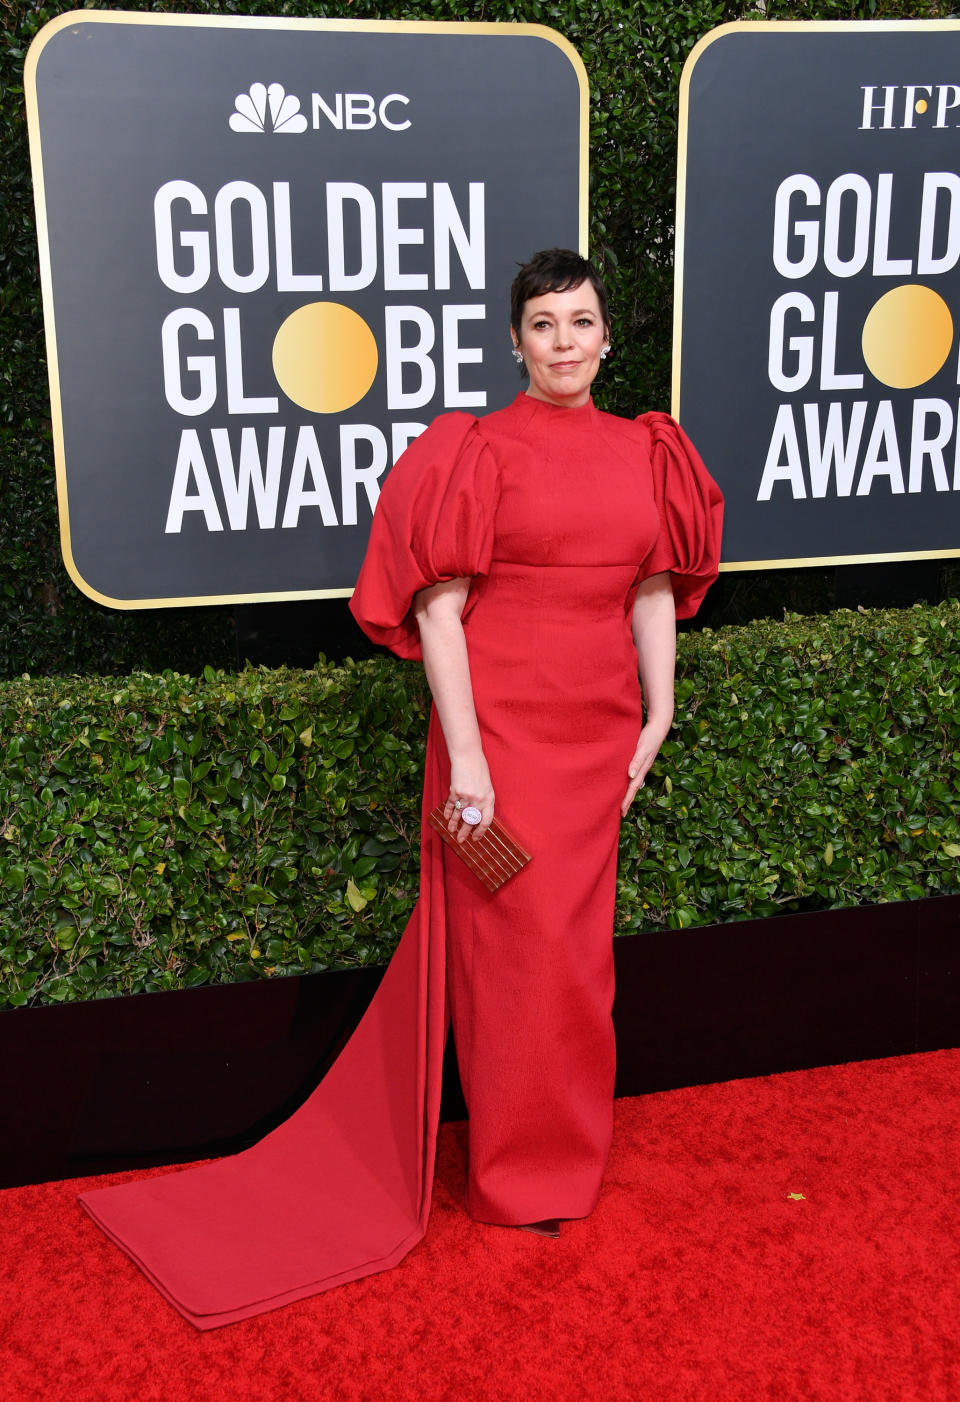 Olivia Coleman won the Actress in a Drama TV Series for her role in The Crown at the Golden Globe awards 2020